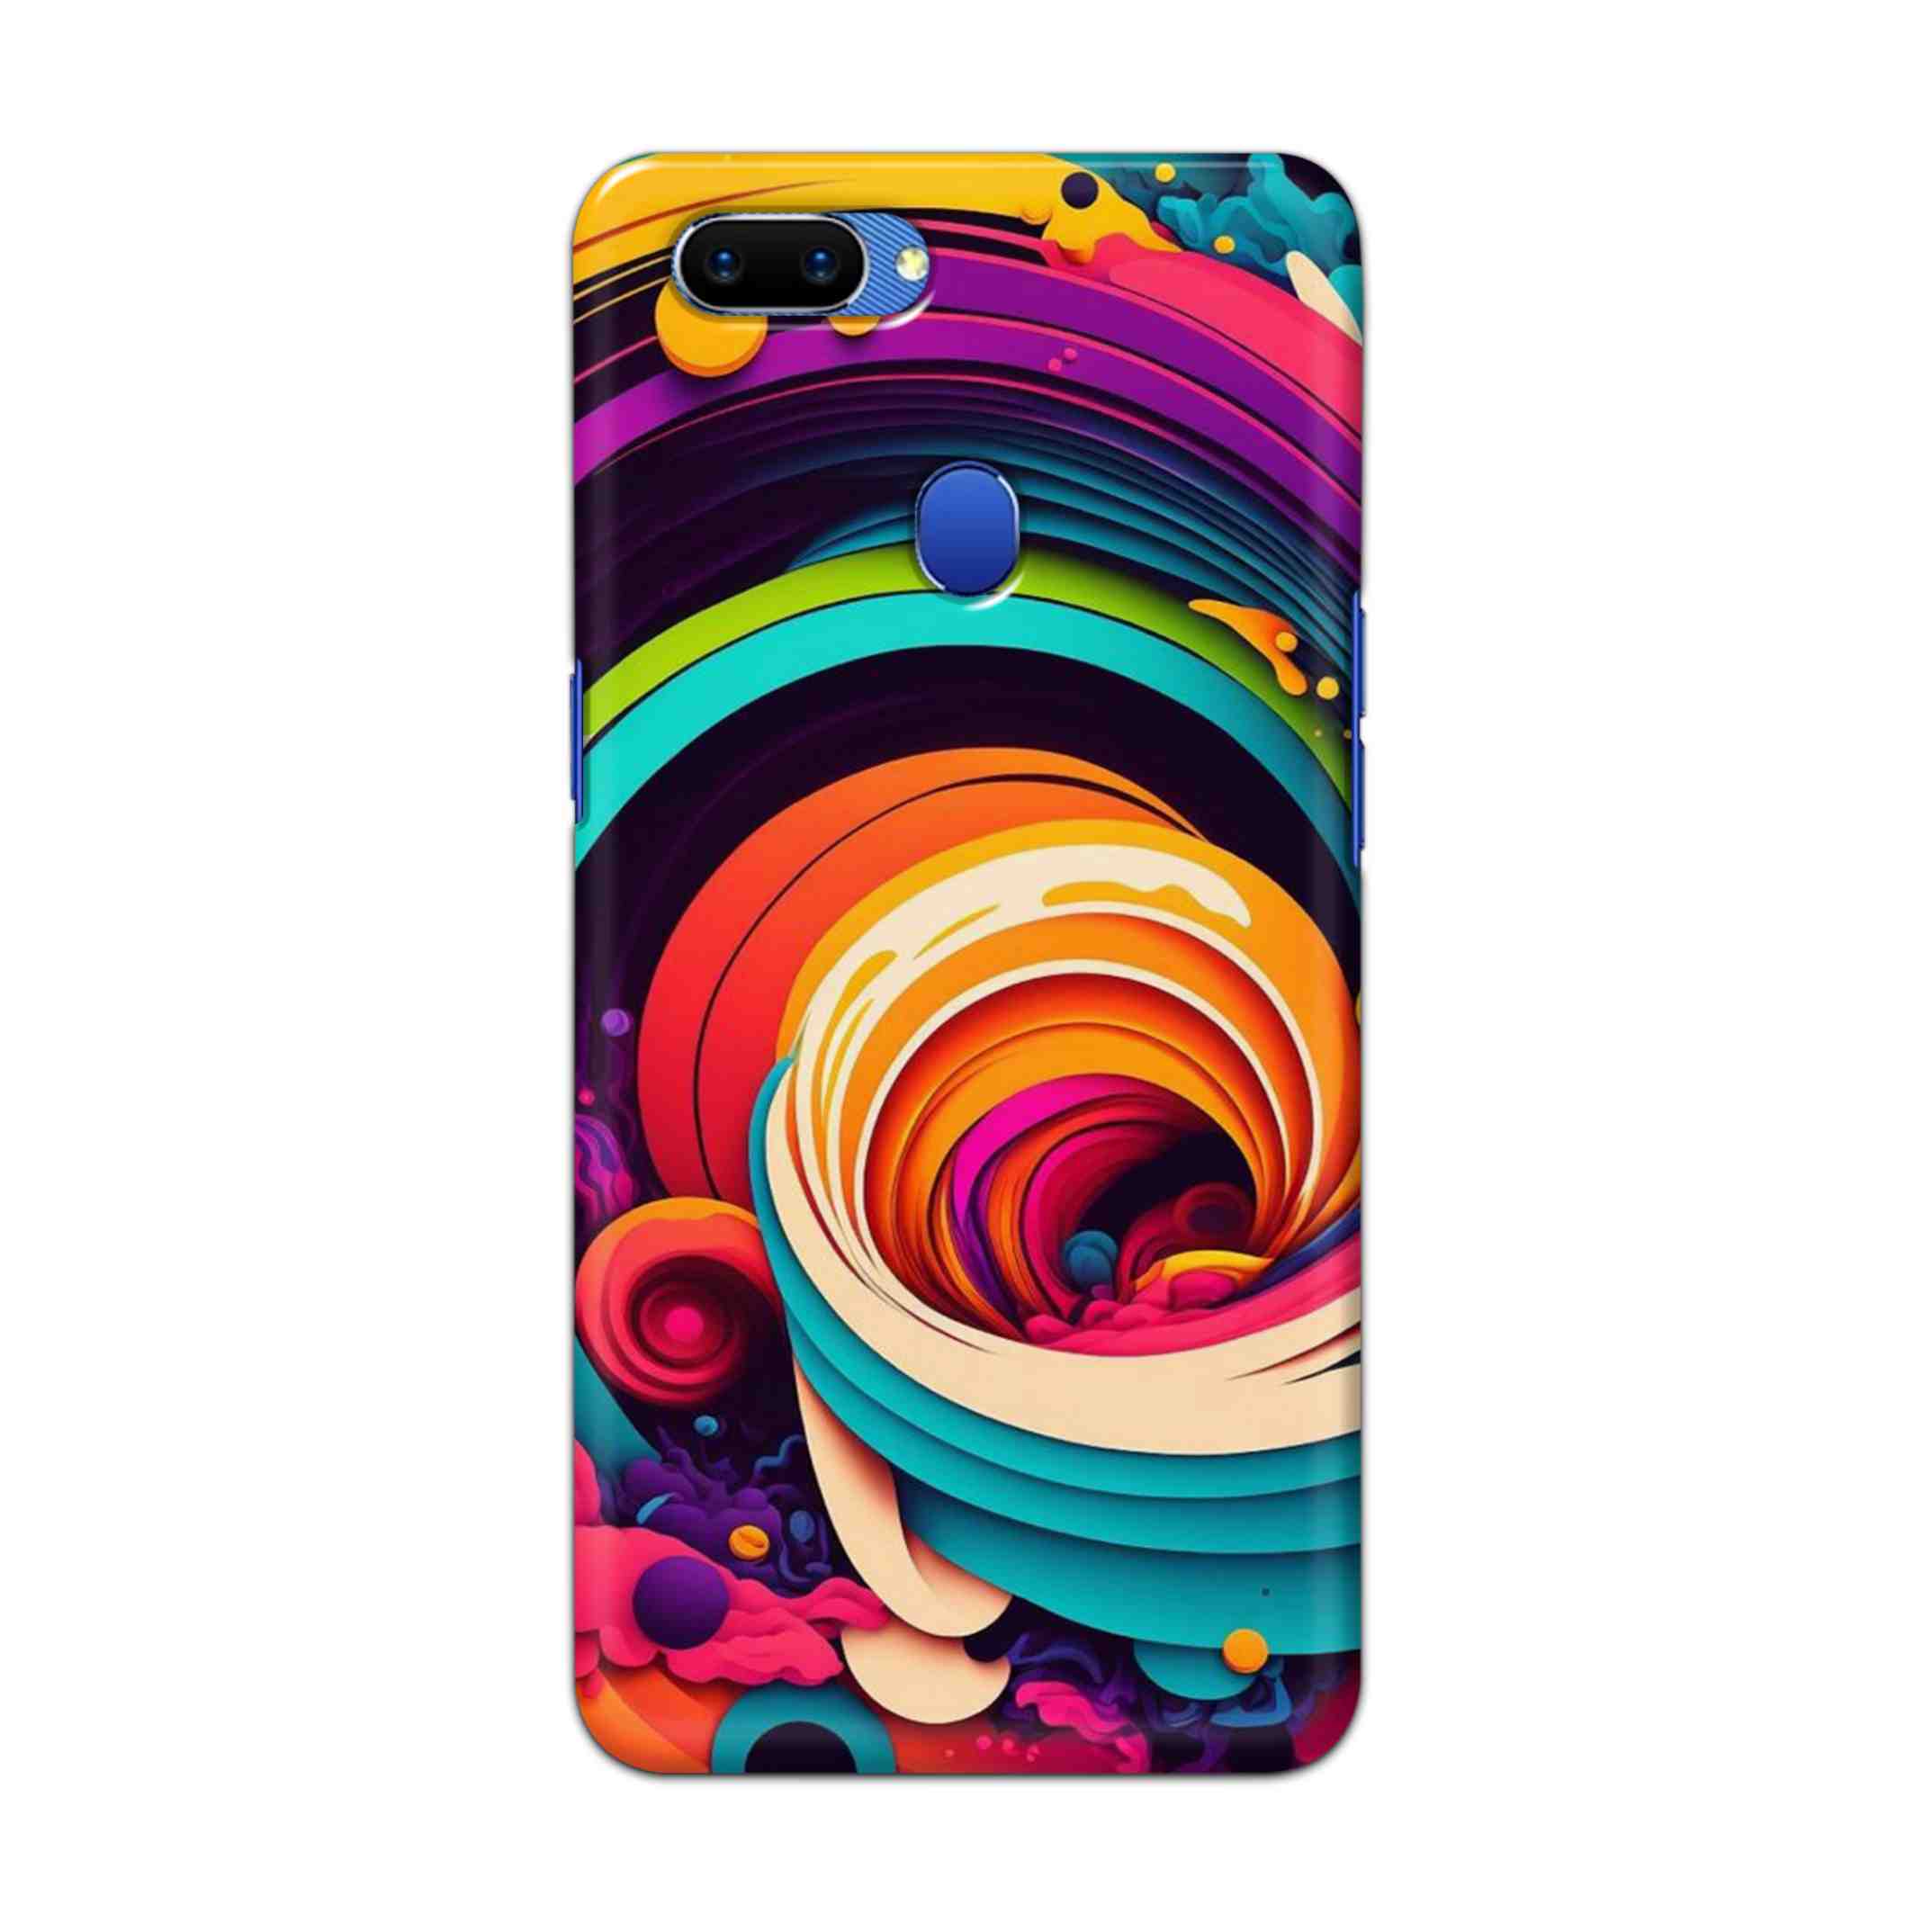 Buy Colour Circle Hard Back Mobile Phone Case Cover For Oppo A5 Online